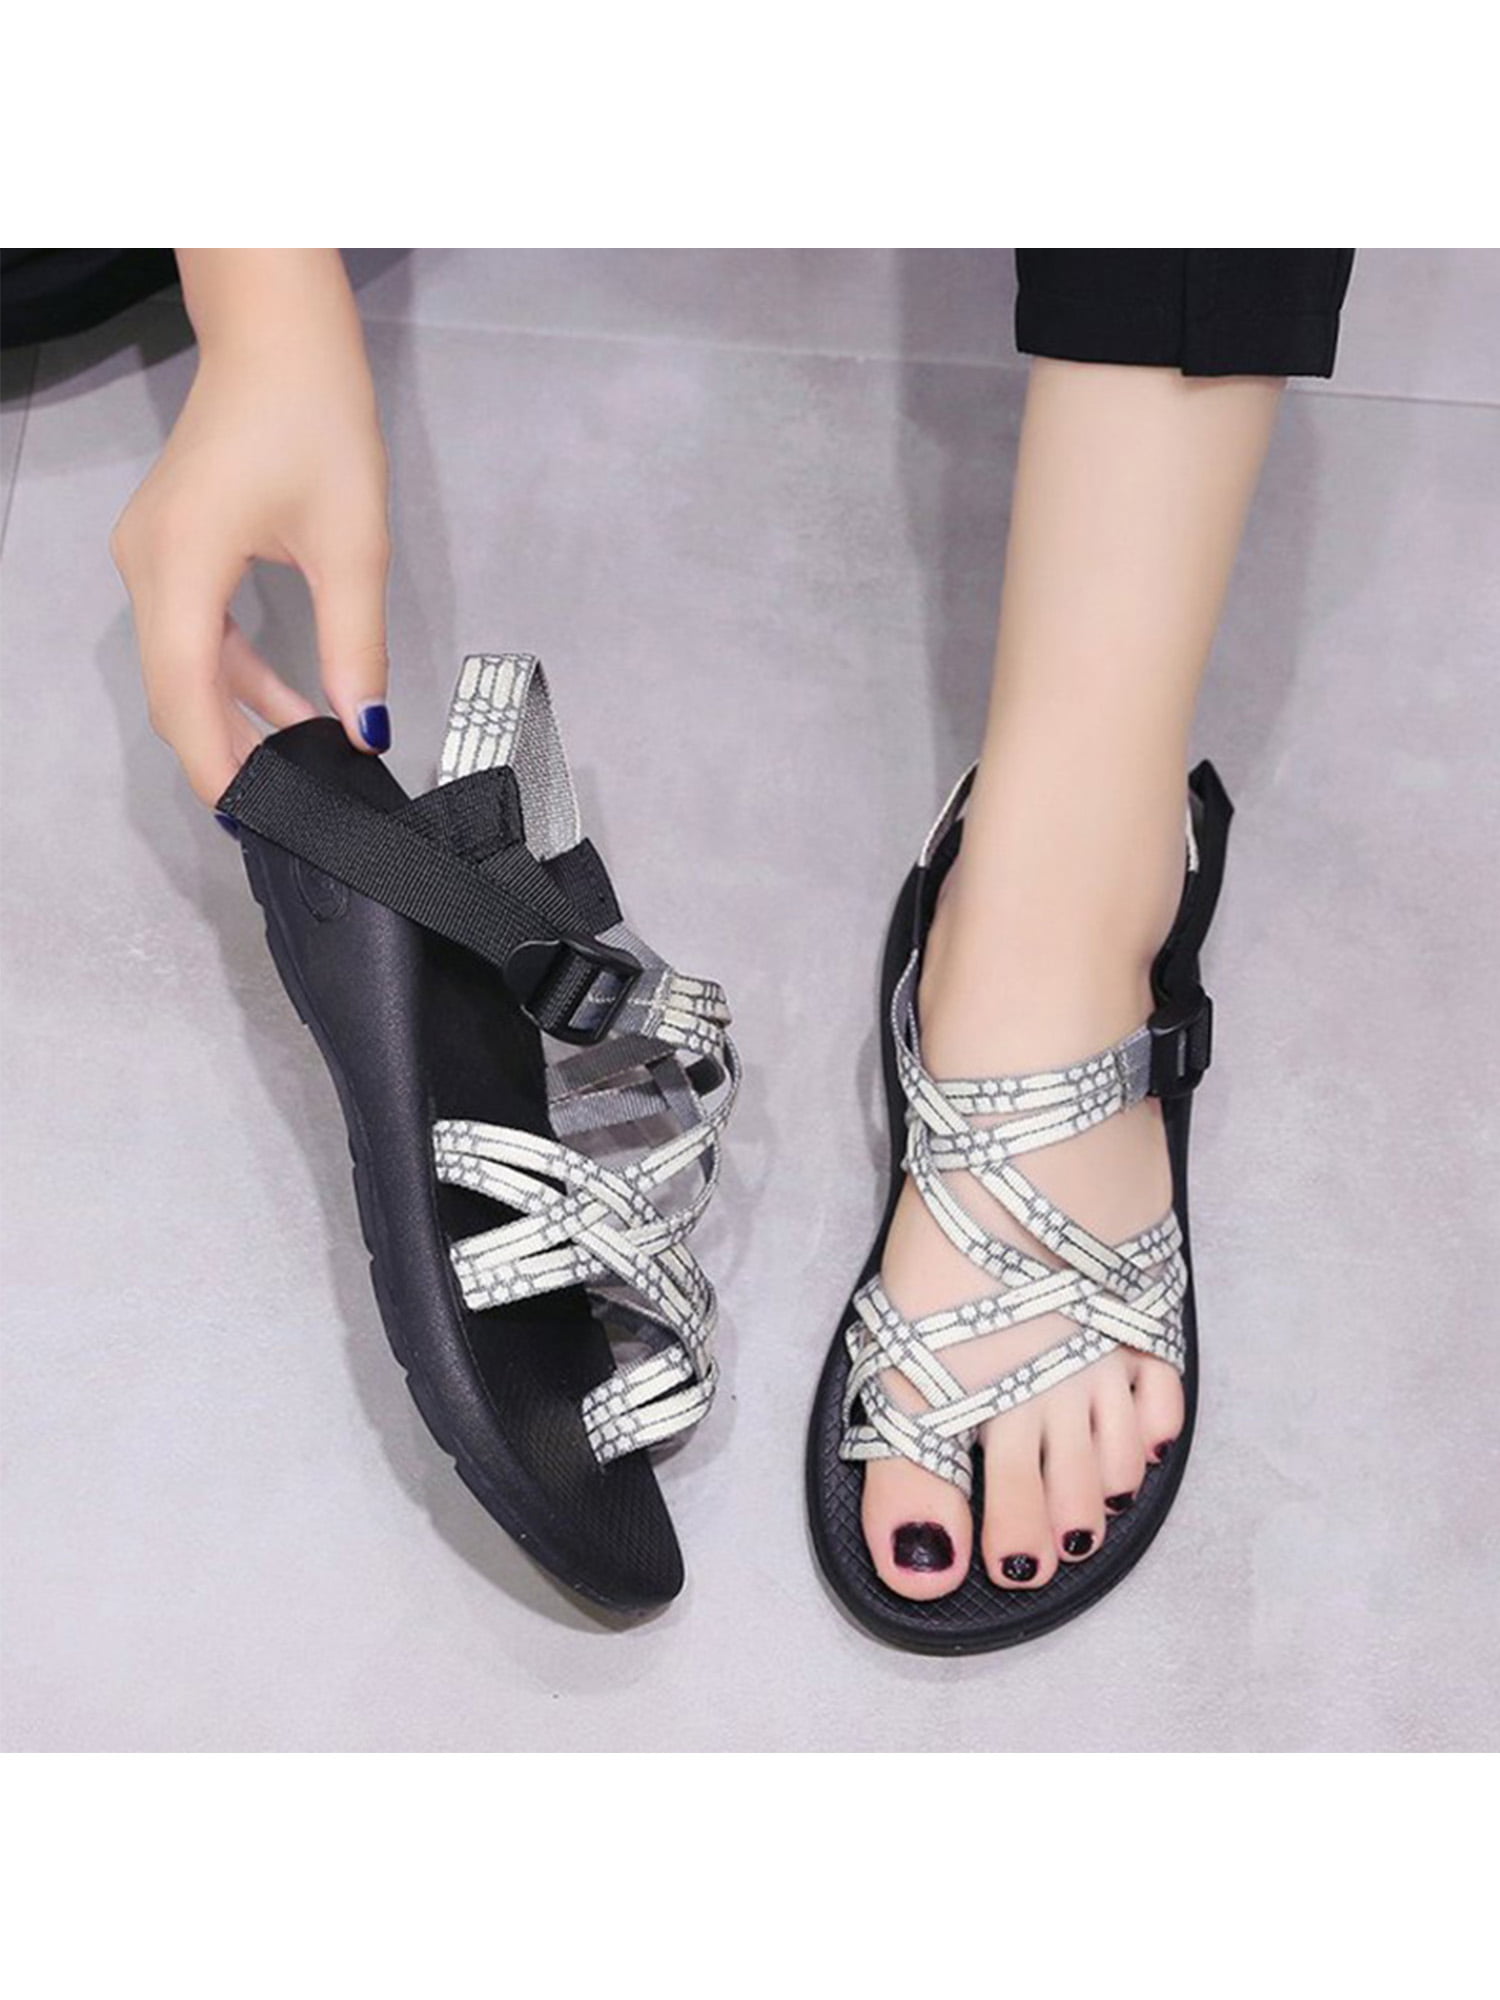 Ladies Open Toe Gladiator Flat Sandals Womens Strap Buckle Shoes Party Summer 